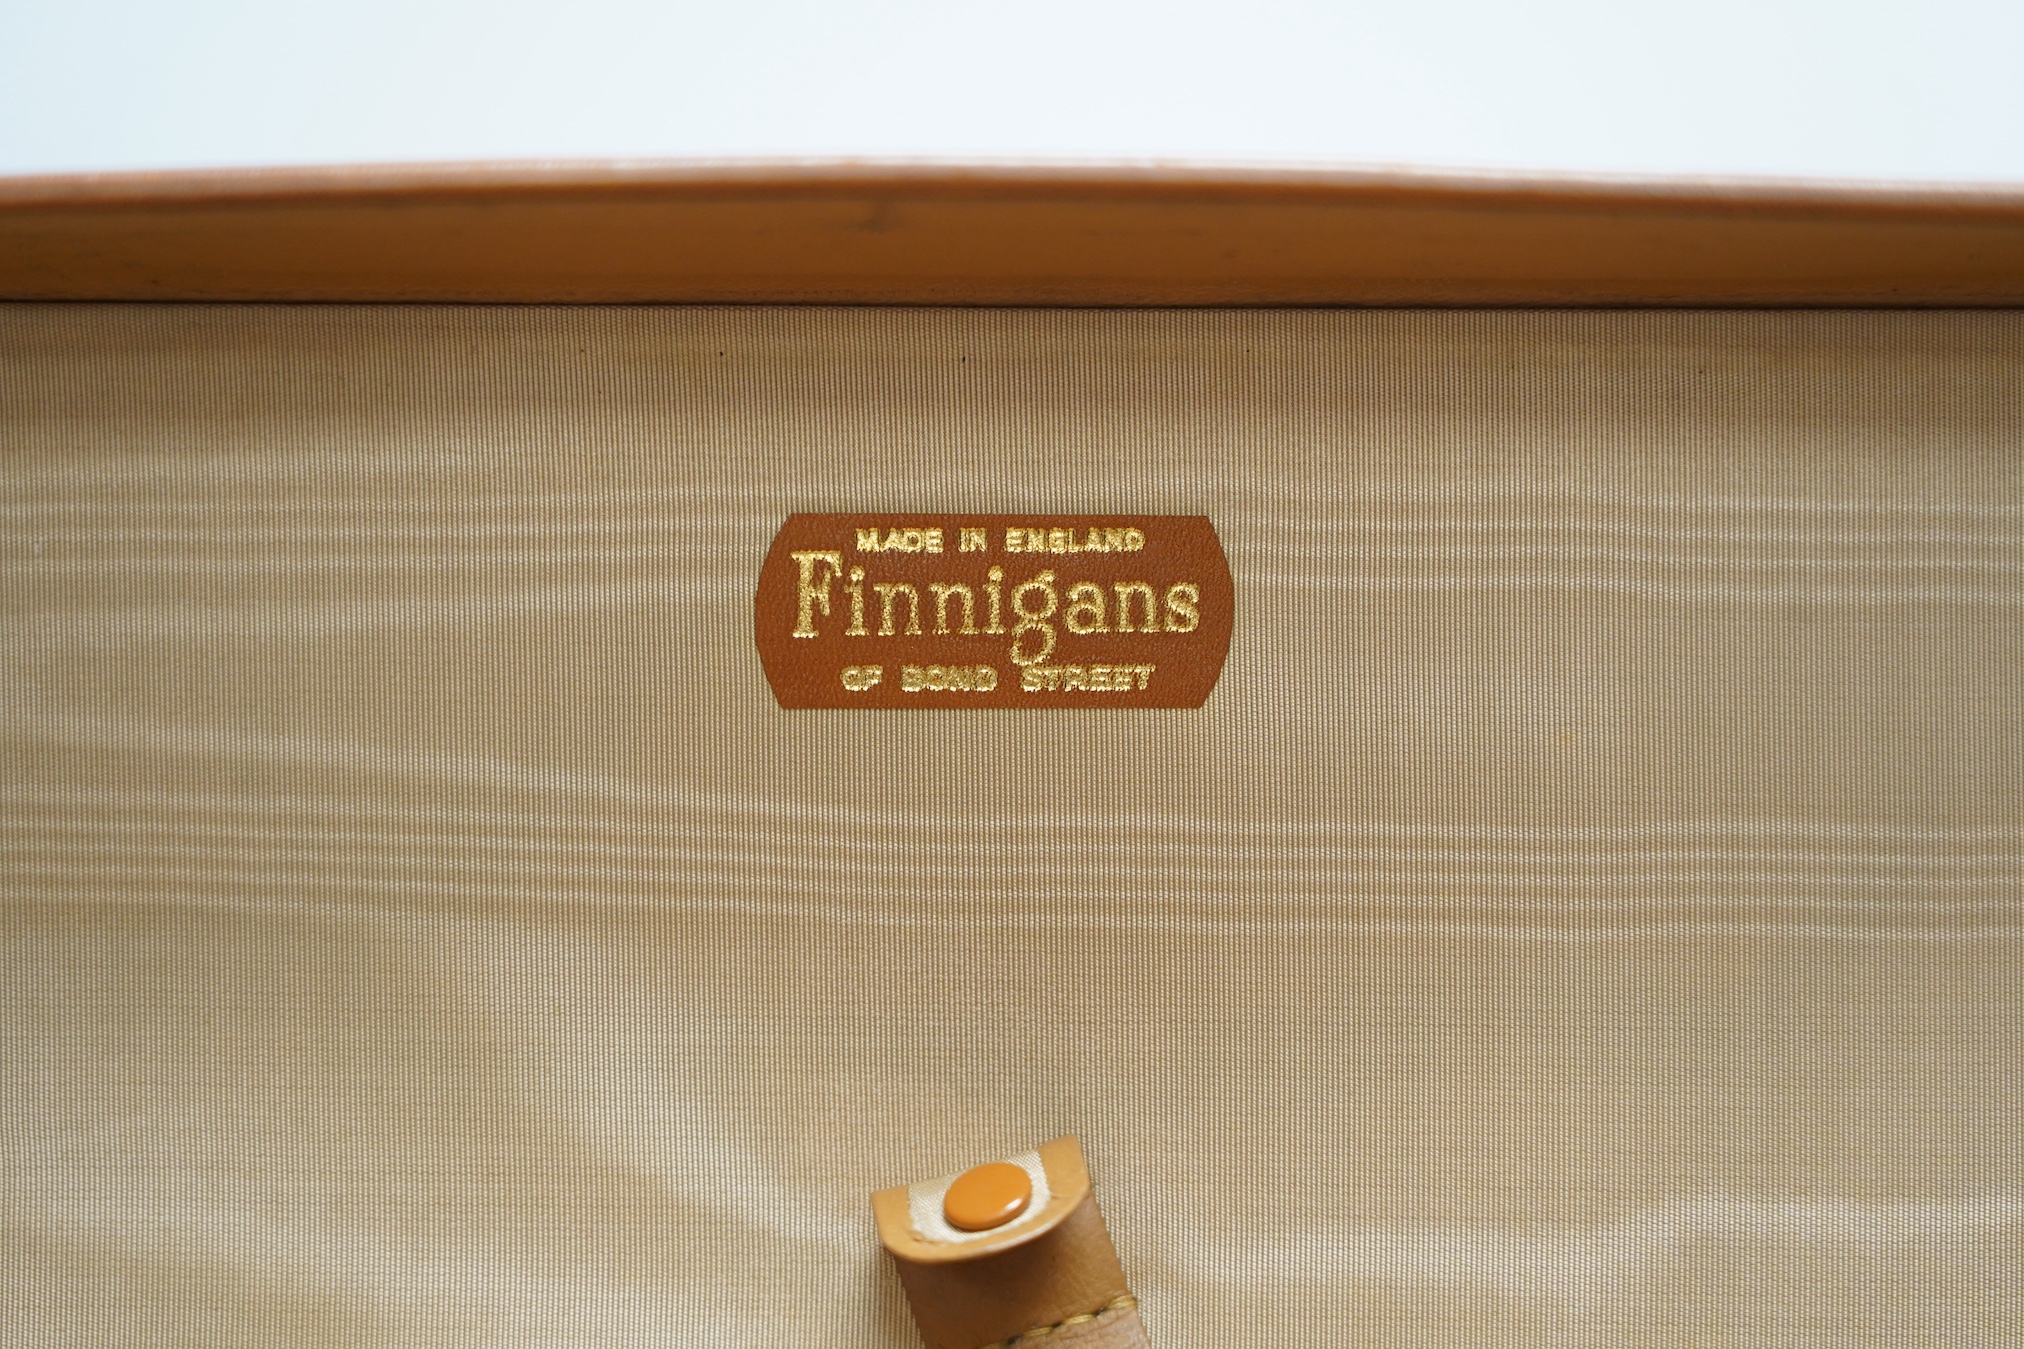 A Finnigans leather lady's case with canvas cover.